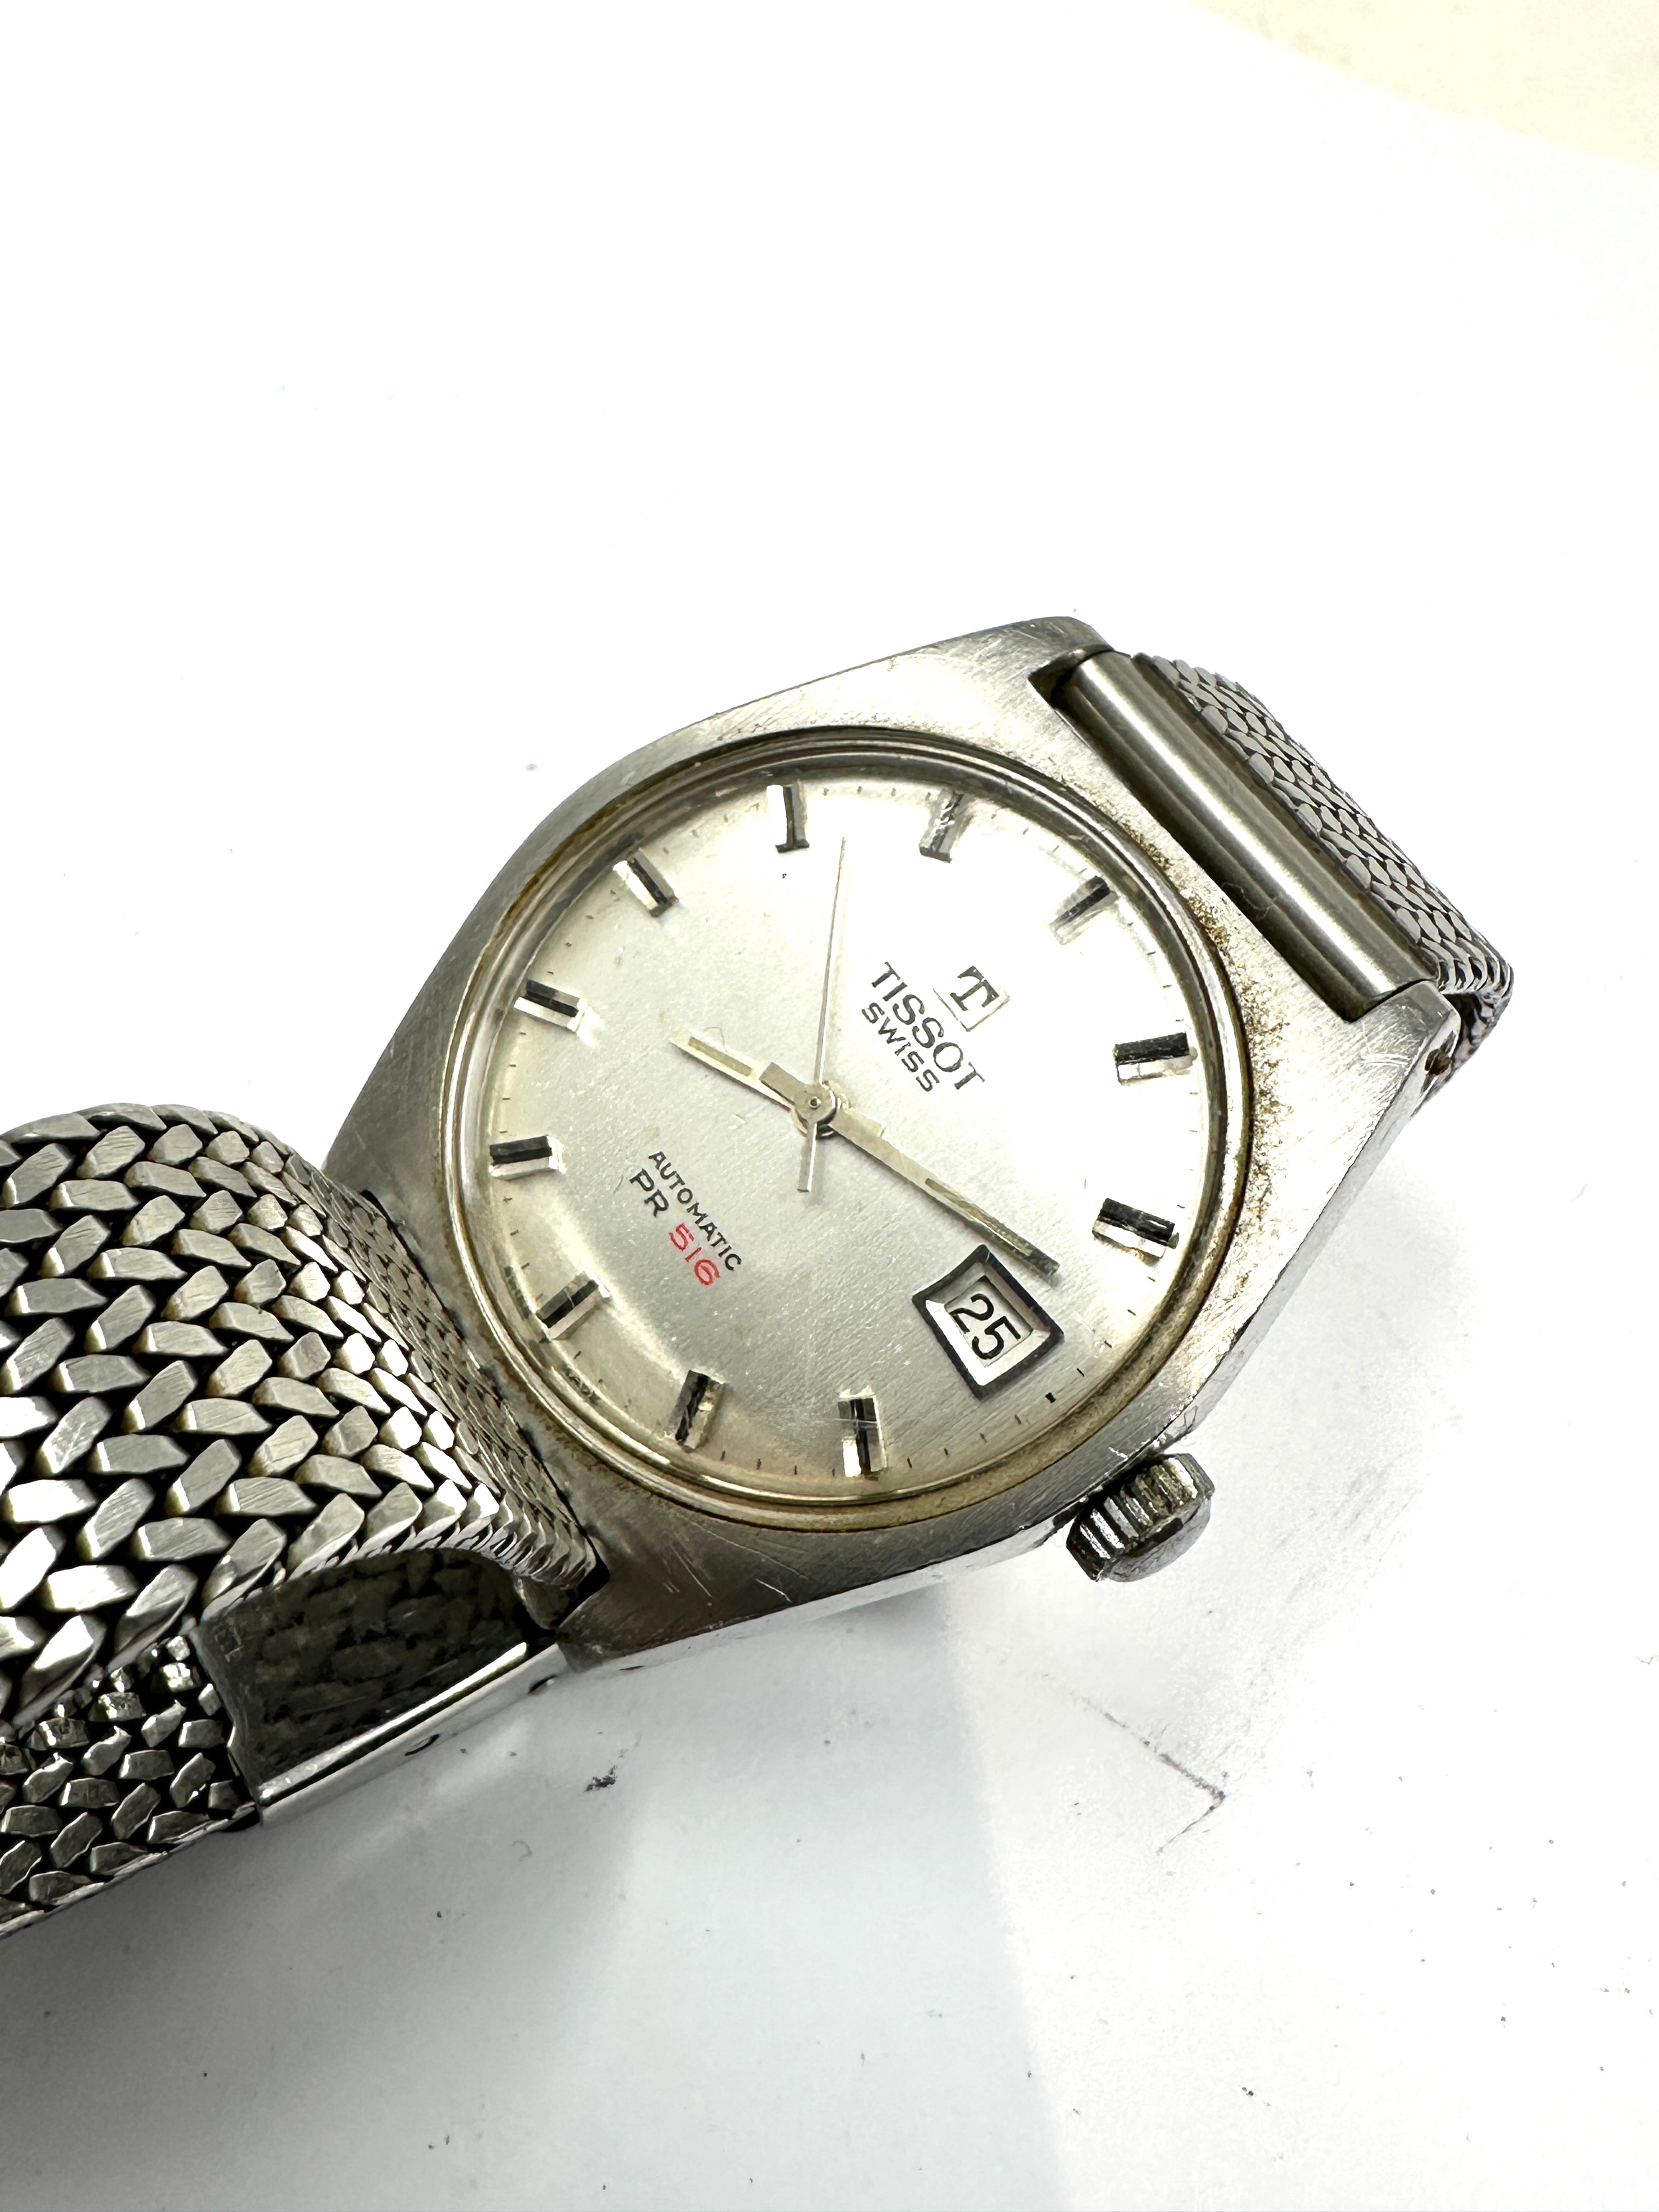 Vintage Tissot Automatic pr516 Date the watch is ticking - Image 2 of 4